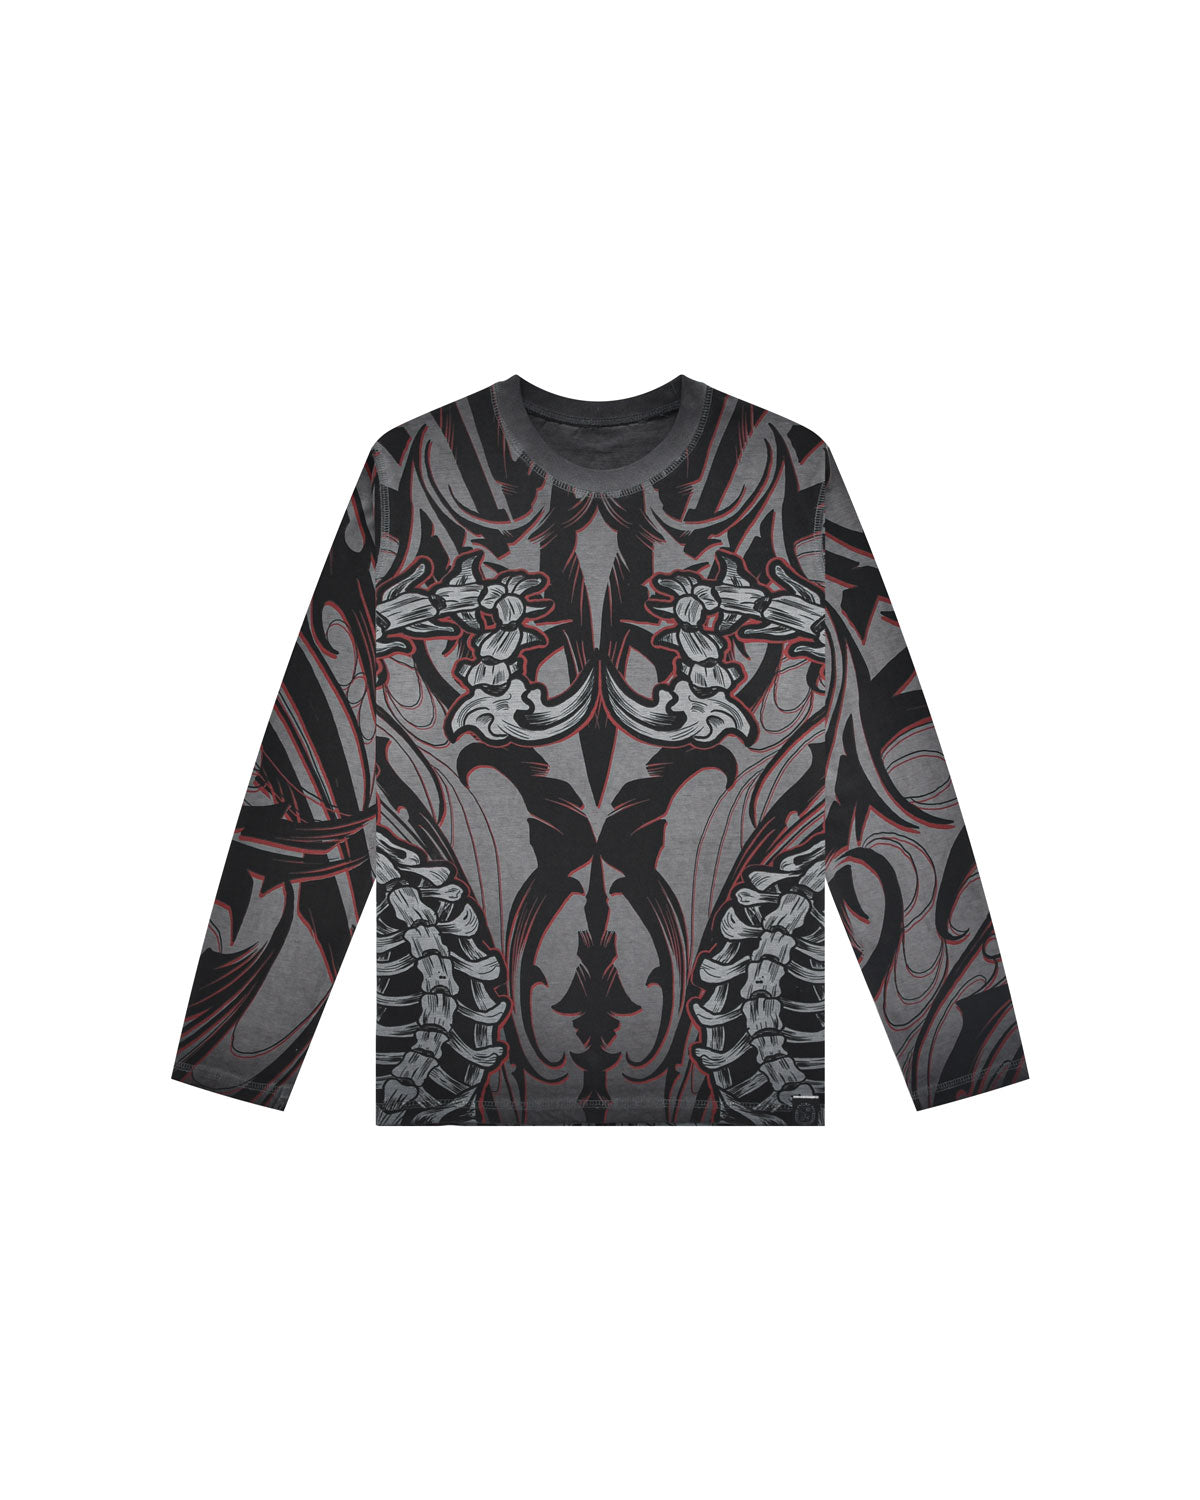 Bambino | T-Shirt A Maniche Lunghe Doubleface Con Stampa All-Over "Tribal"